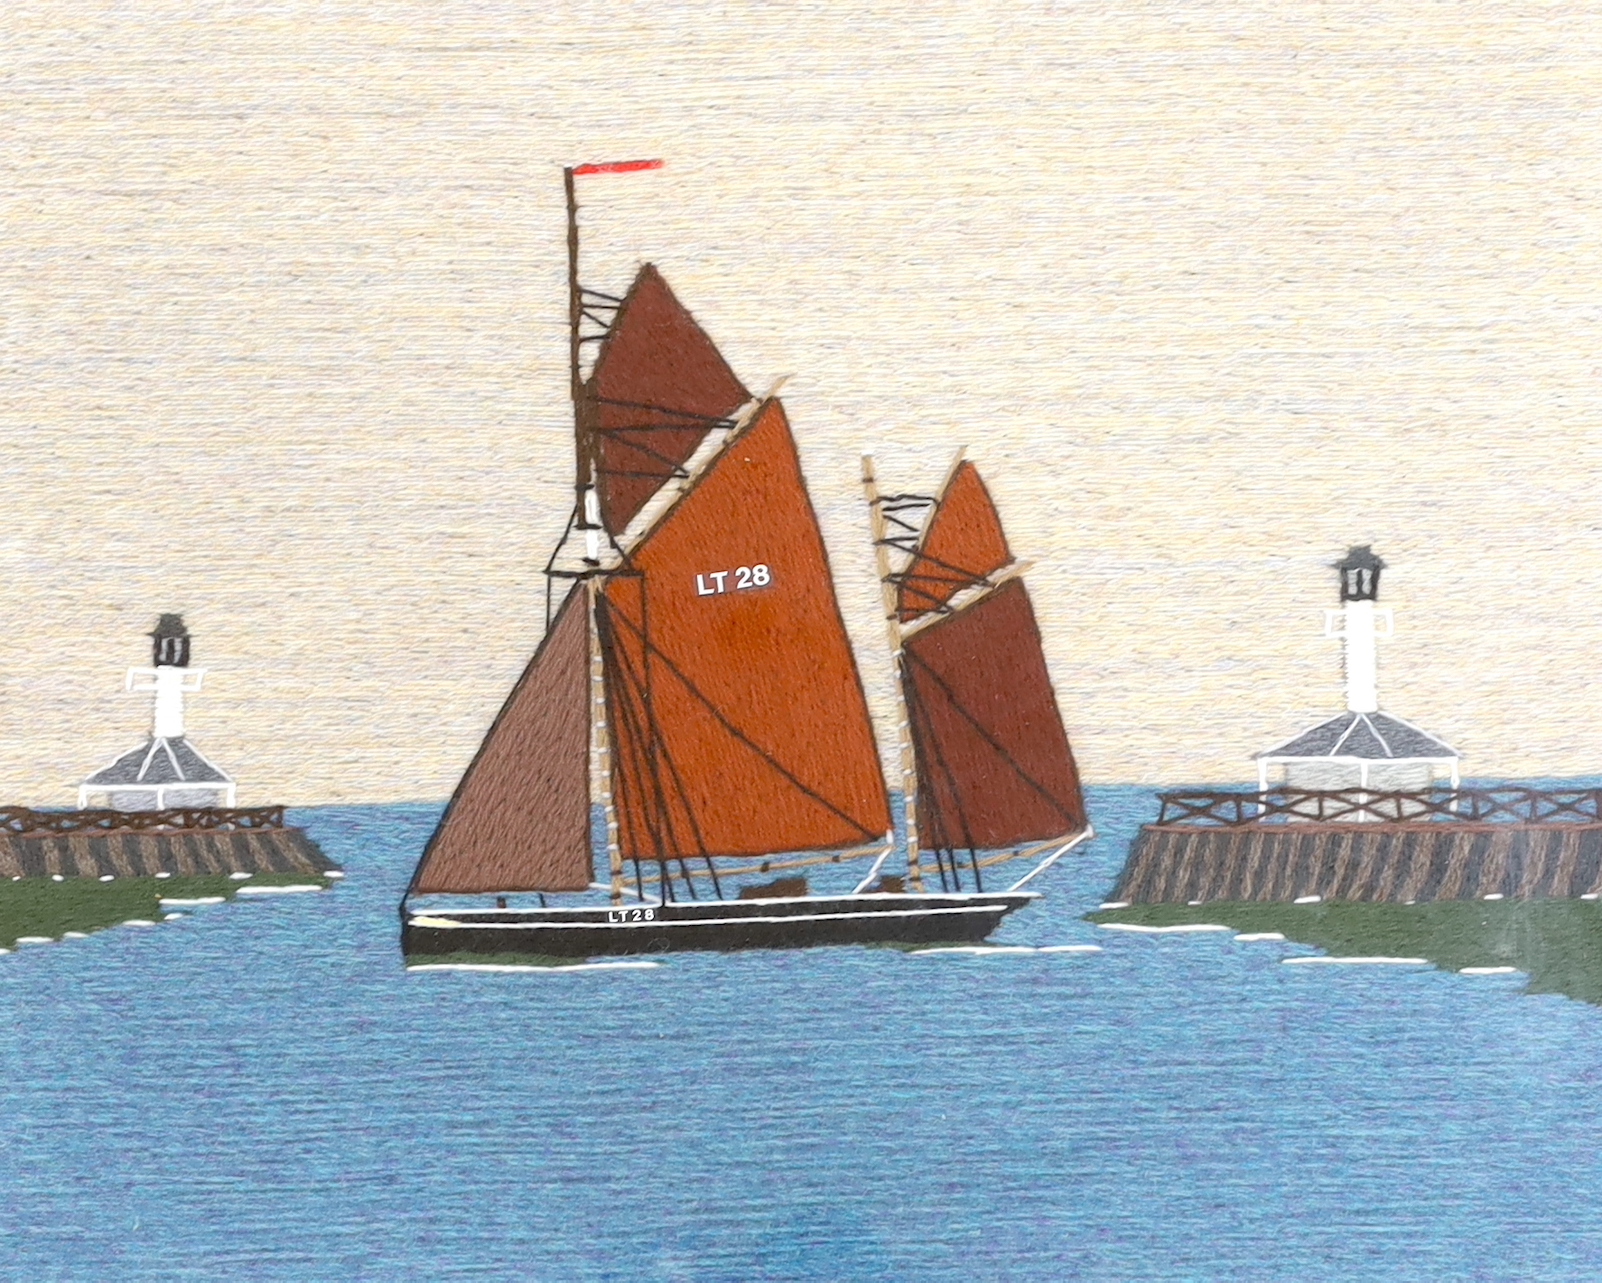 A long stitch wool work embroidery of ‘The Lowestoft Ketch Susie LT28’, in a harbour mouth, 20th century, 35.5 x 44cm.